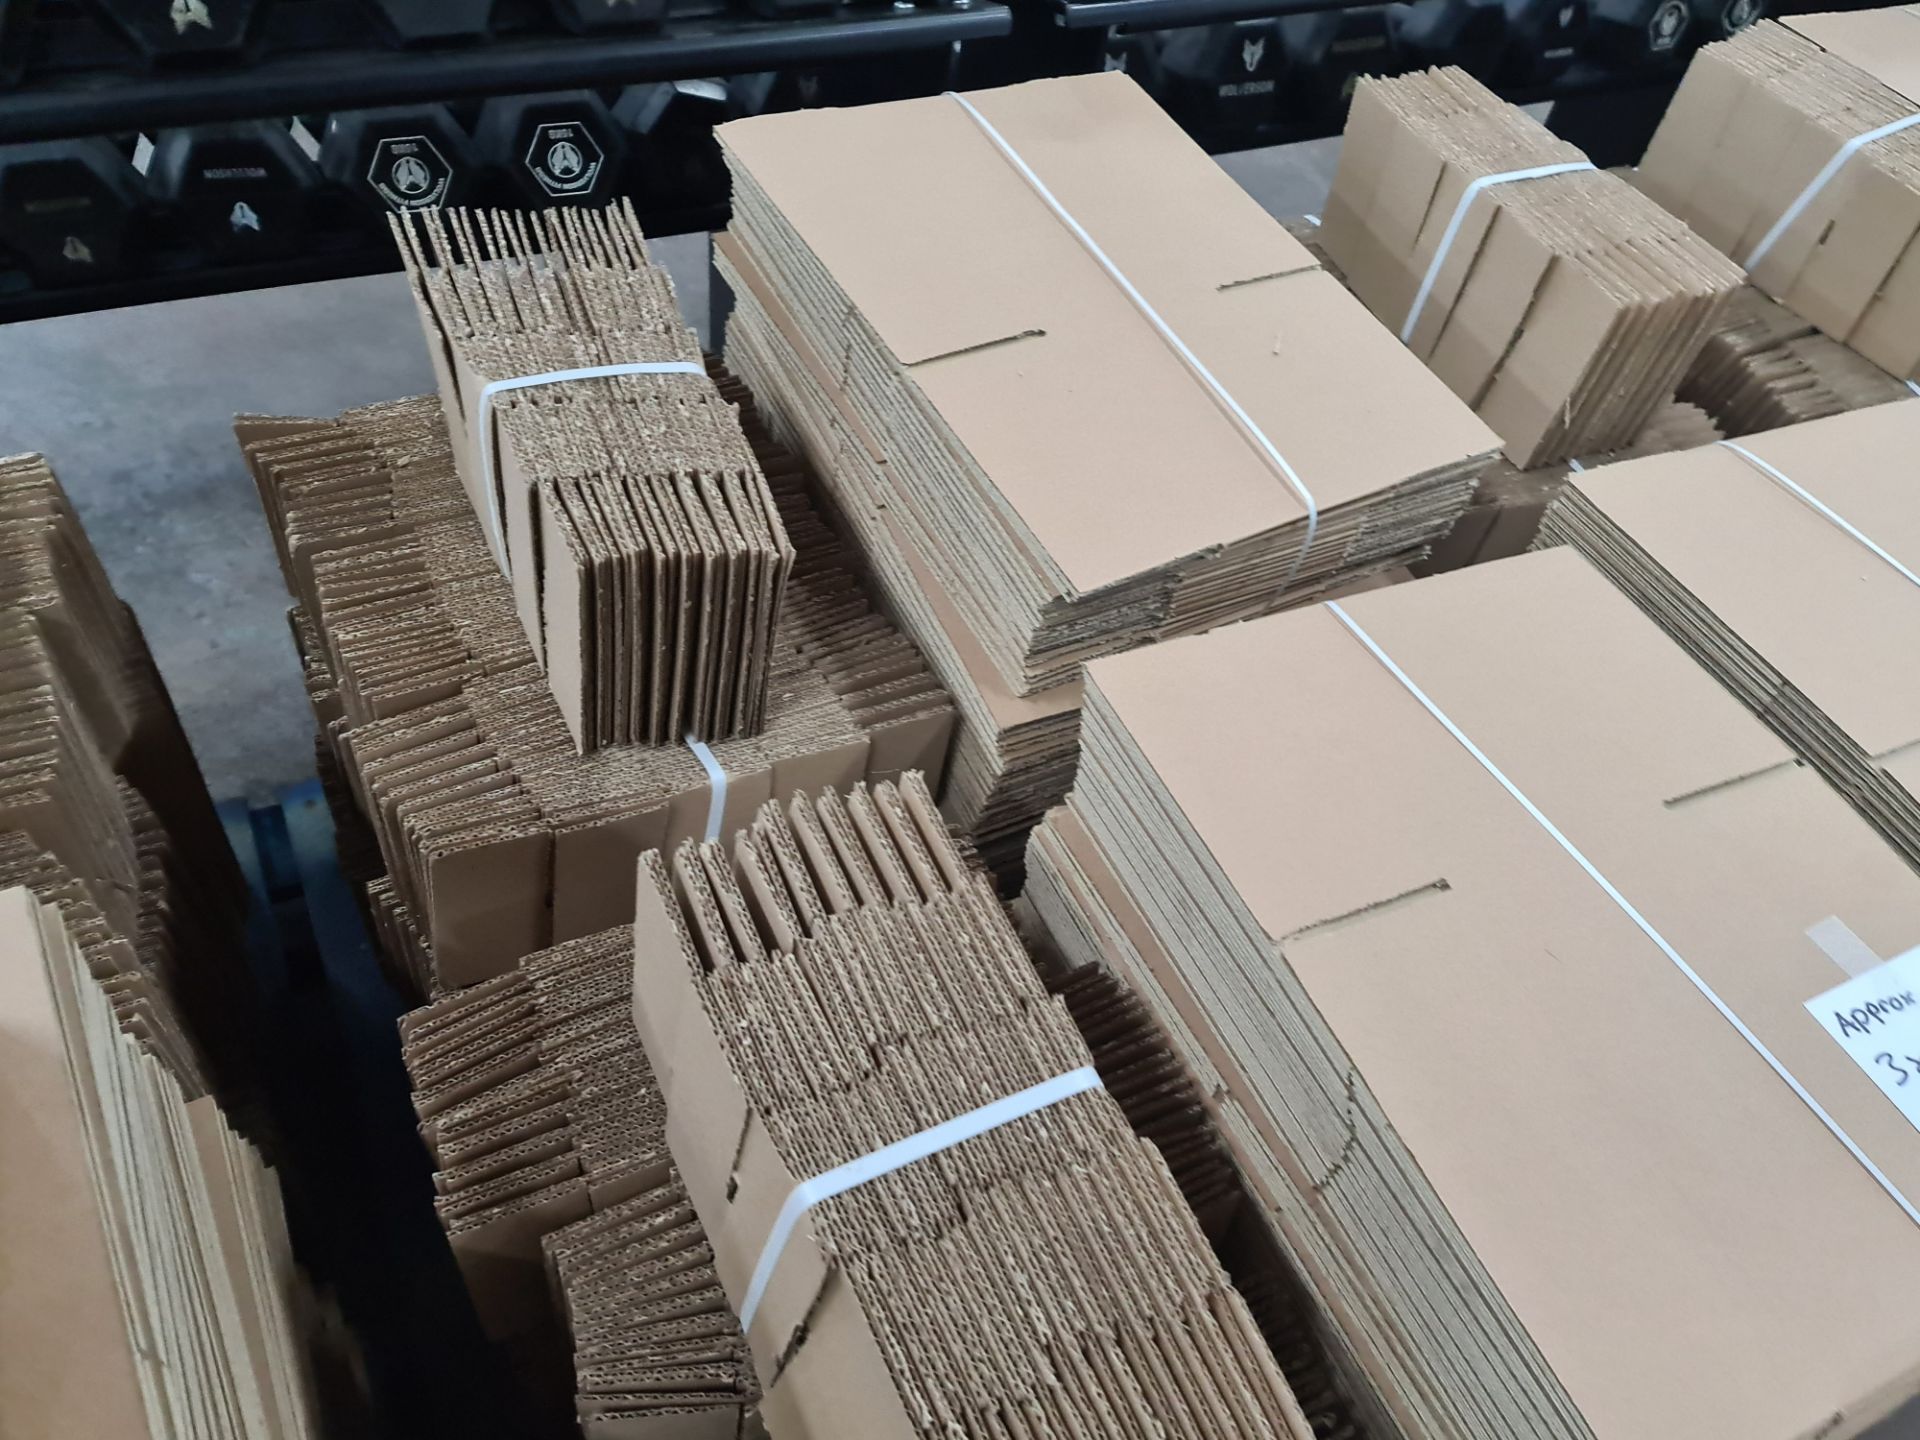 The contents of a pallet of cardboard boxes comprising approximately 300 boxes and 300 inserts in to - Image 6 of 8